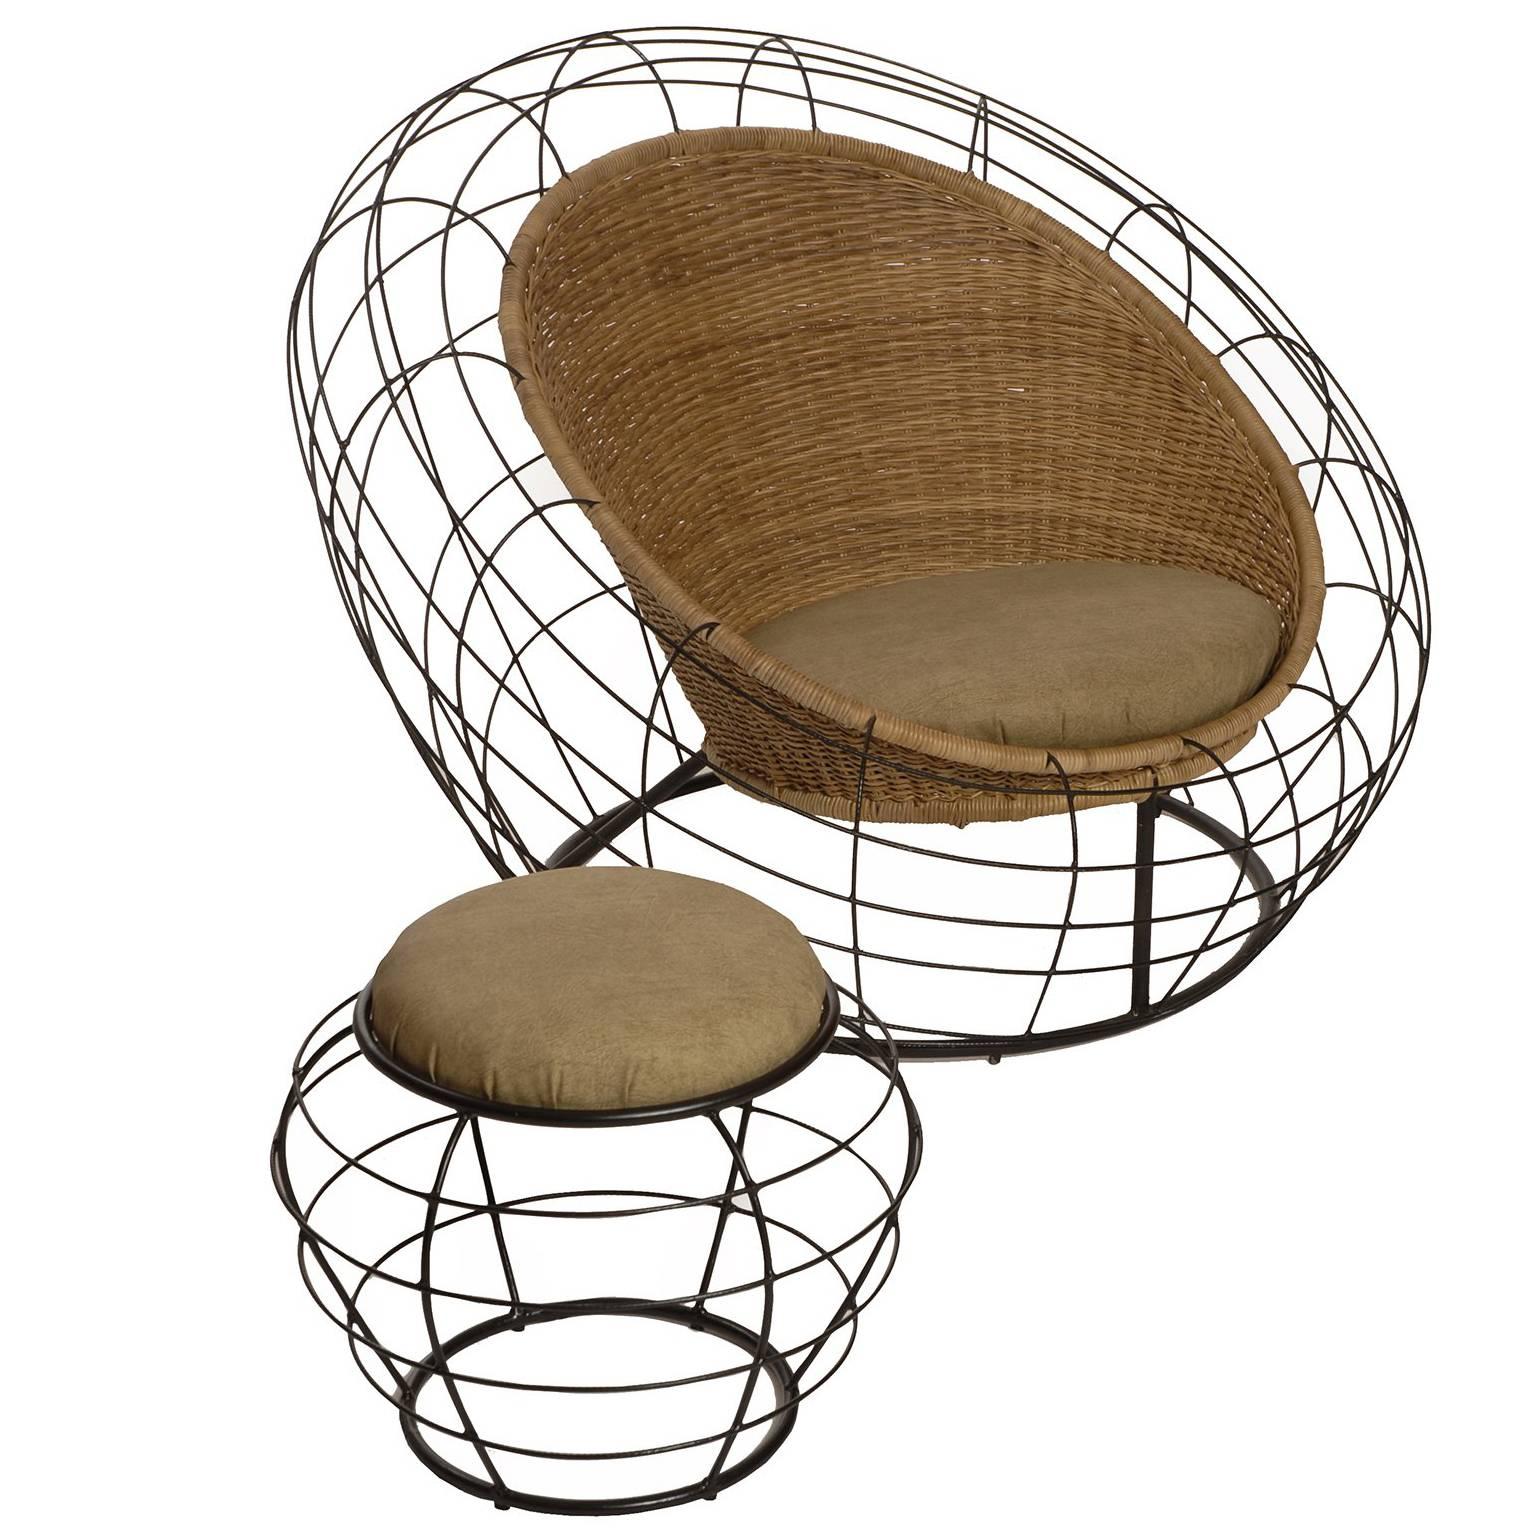 Joatinga Brazilian Contemporary Natural Reed and Metal Easychair by Lattoog